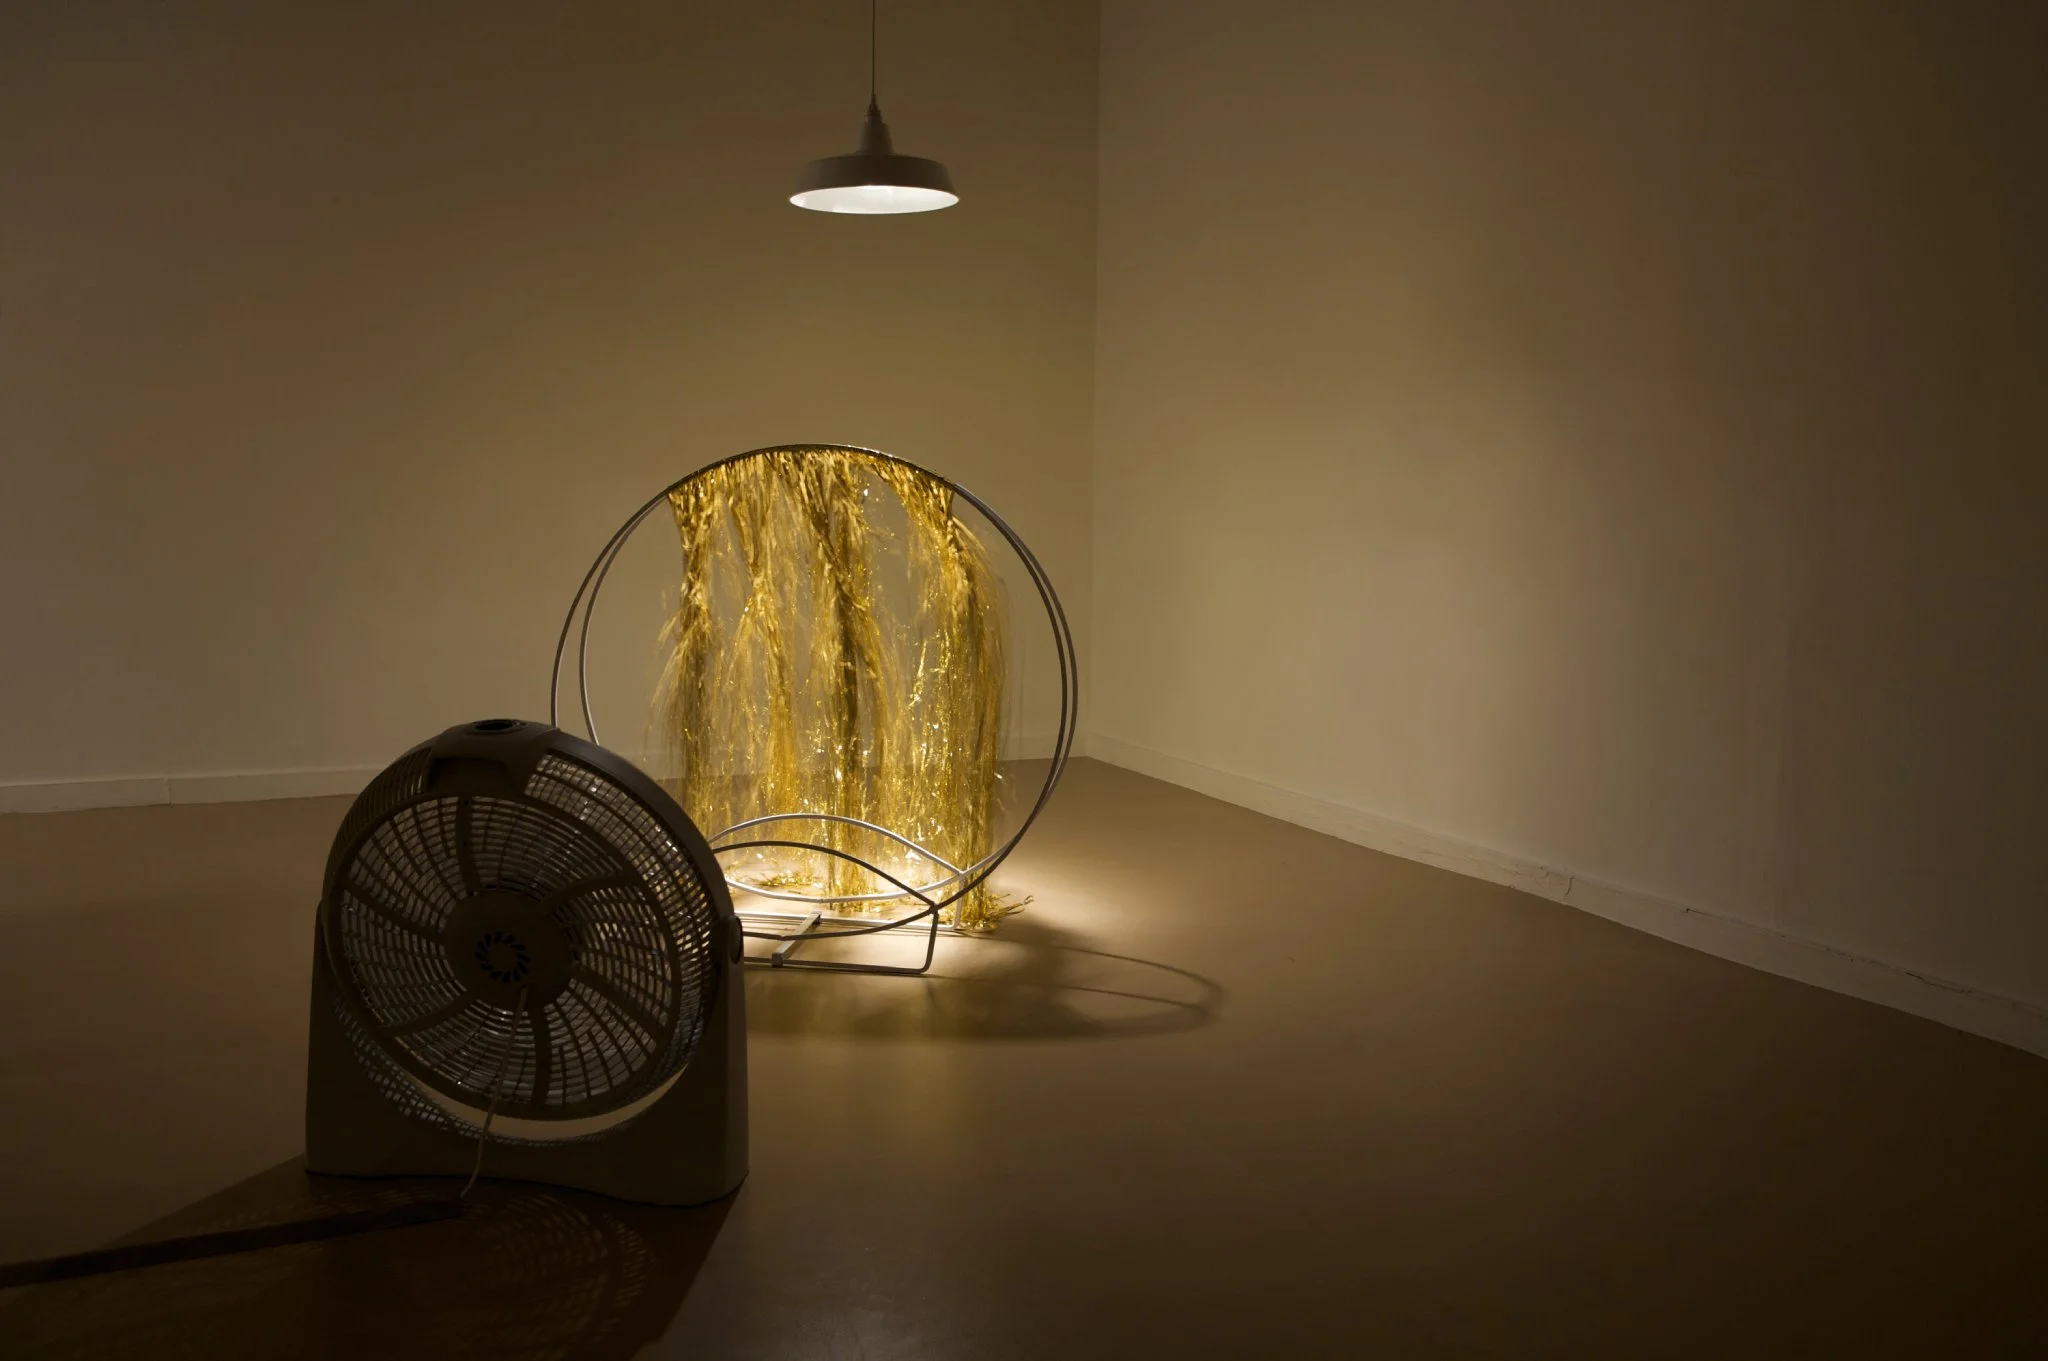 Installation view, "A Closer Look 7", 2008, Spruance Gallery